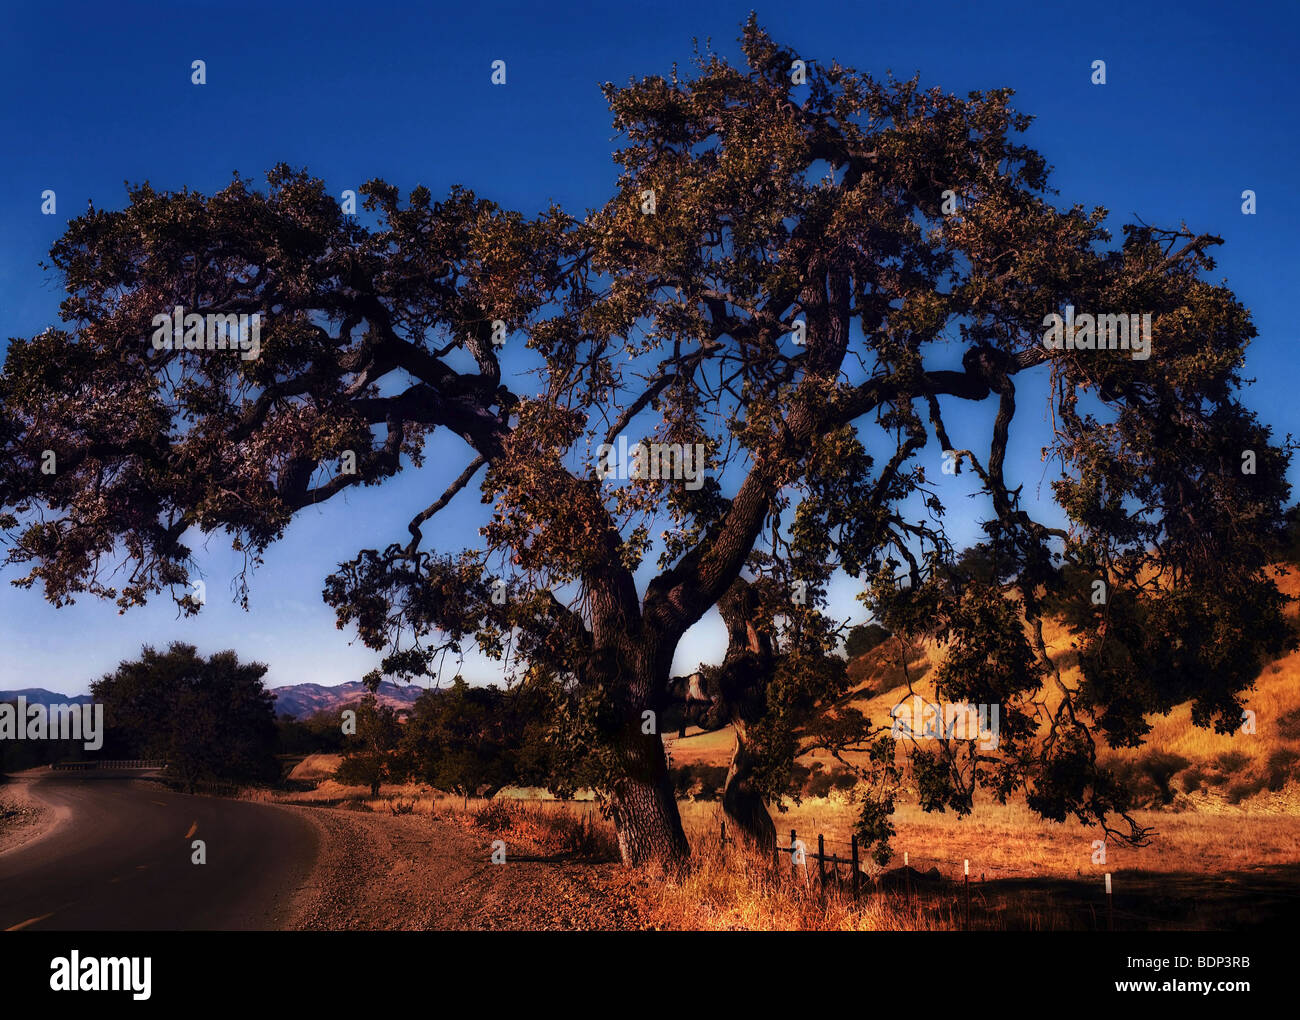 A blue sky against a sihouetted tree Stock Photo